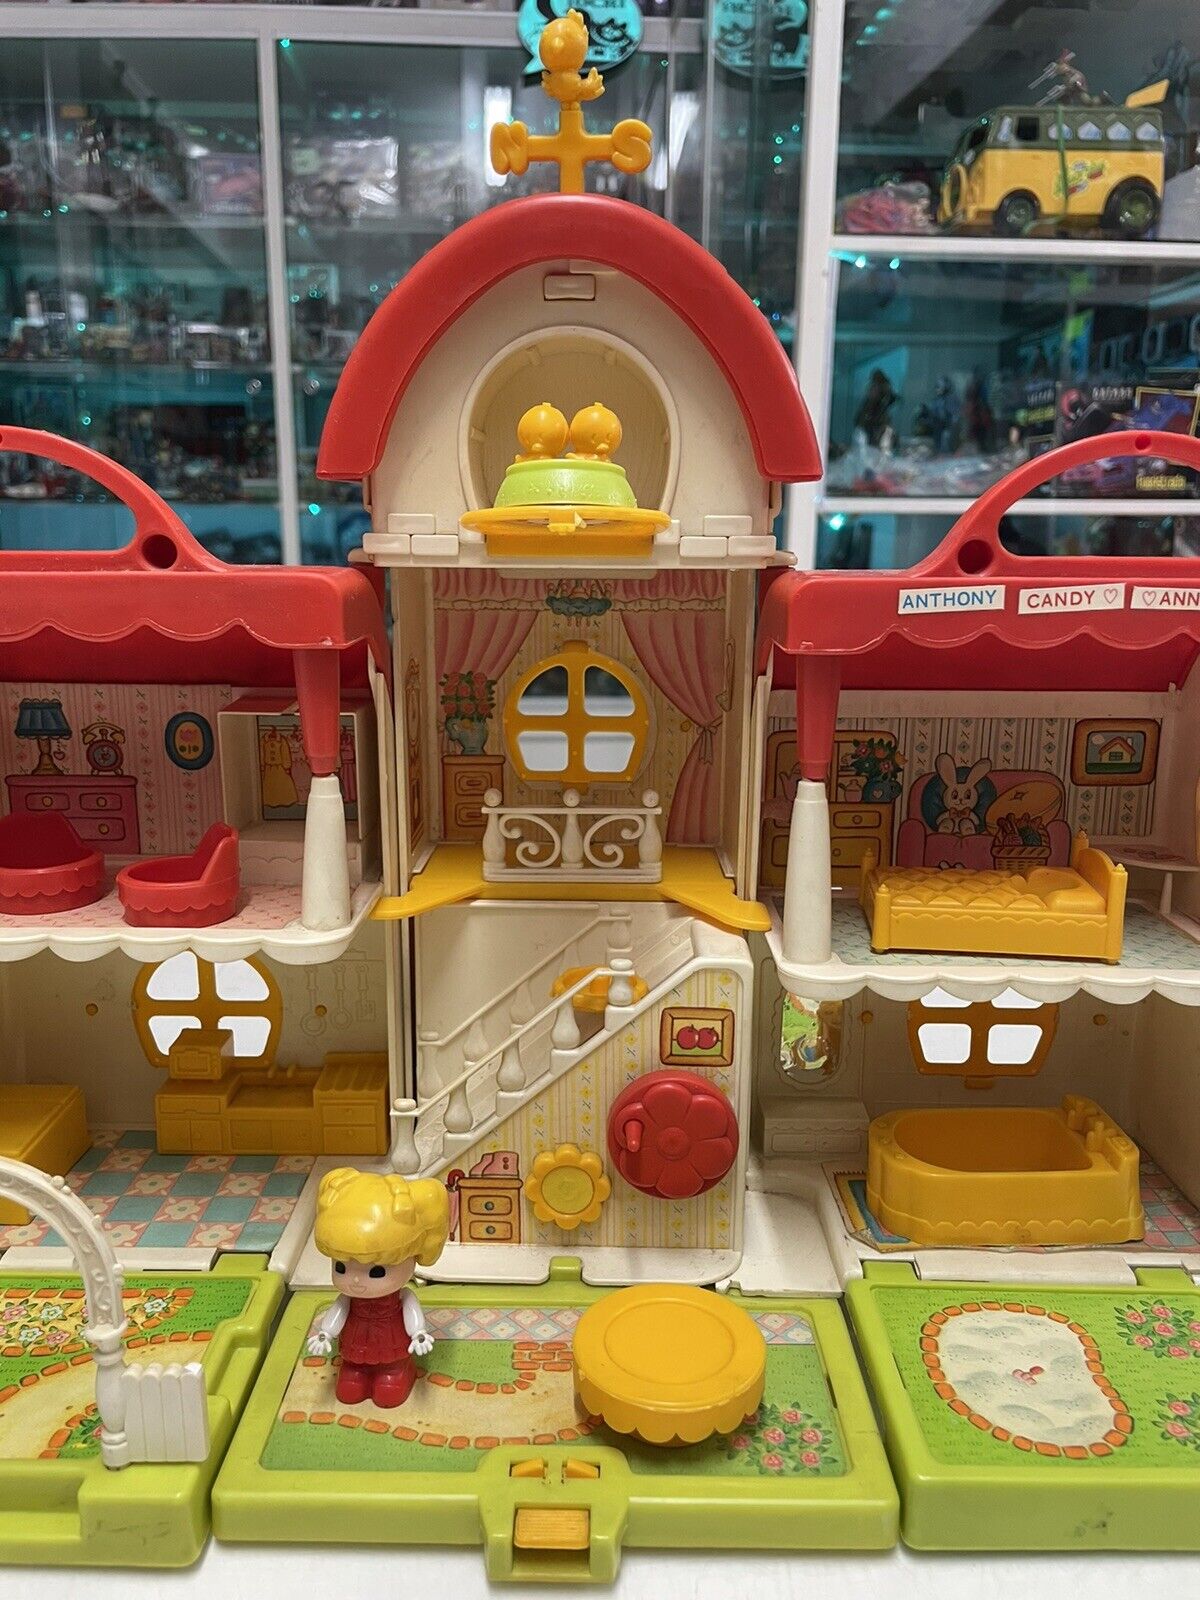 CANDY-CANDY-80s-Bandai-Japan-Casa-di-Pony-Pony-House-playset-Candys-House-134365887605-3